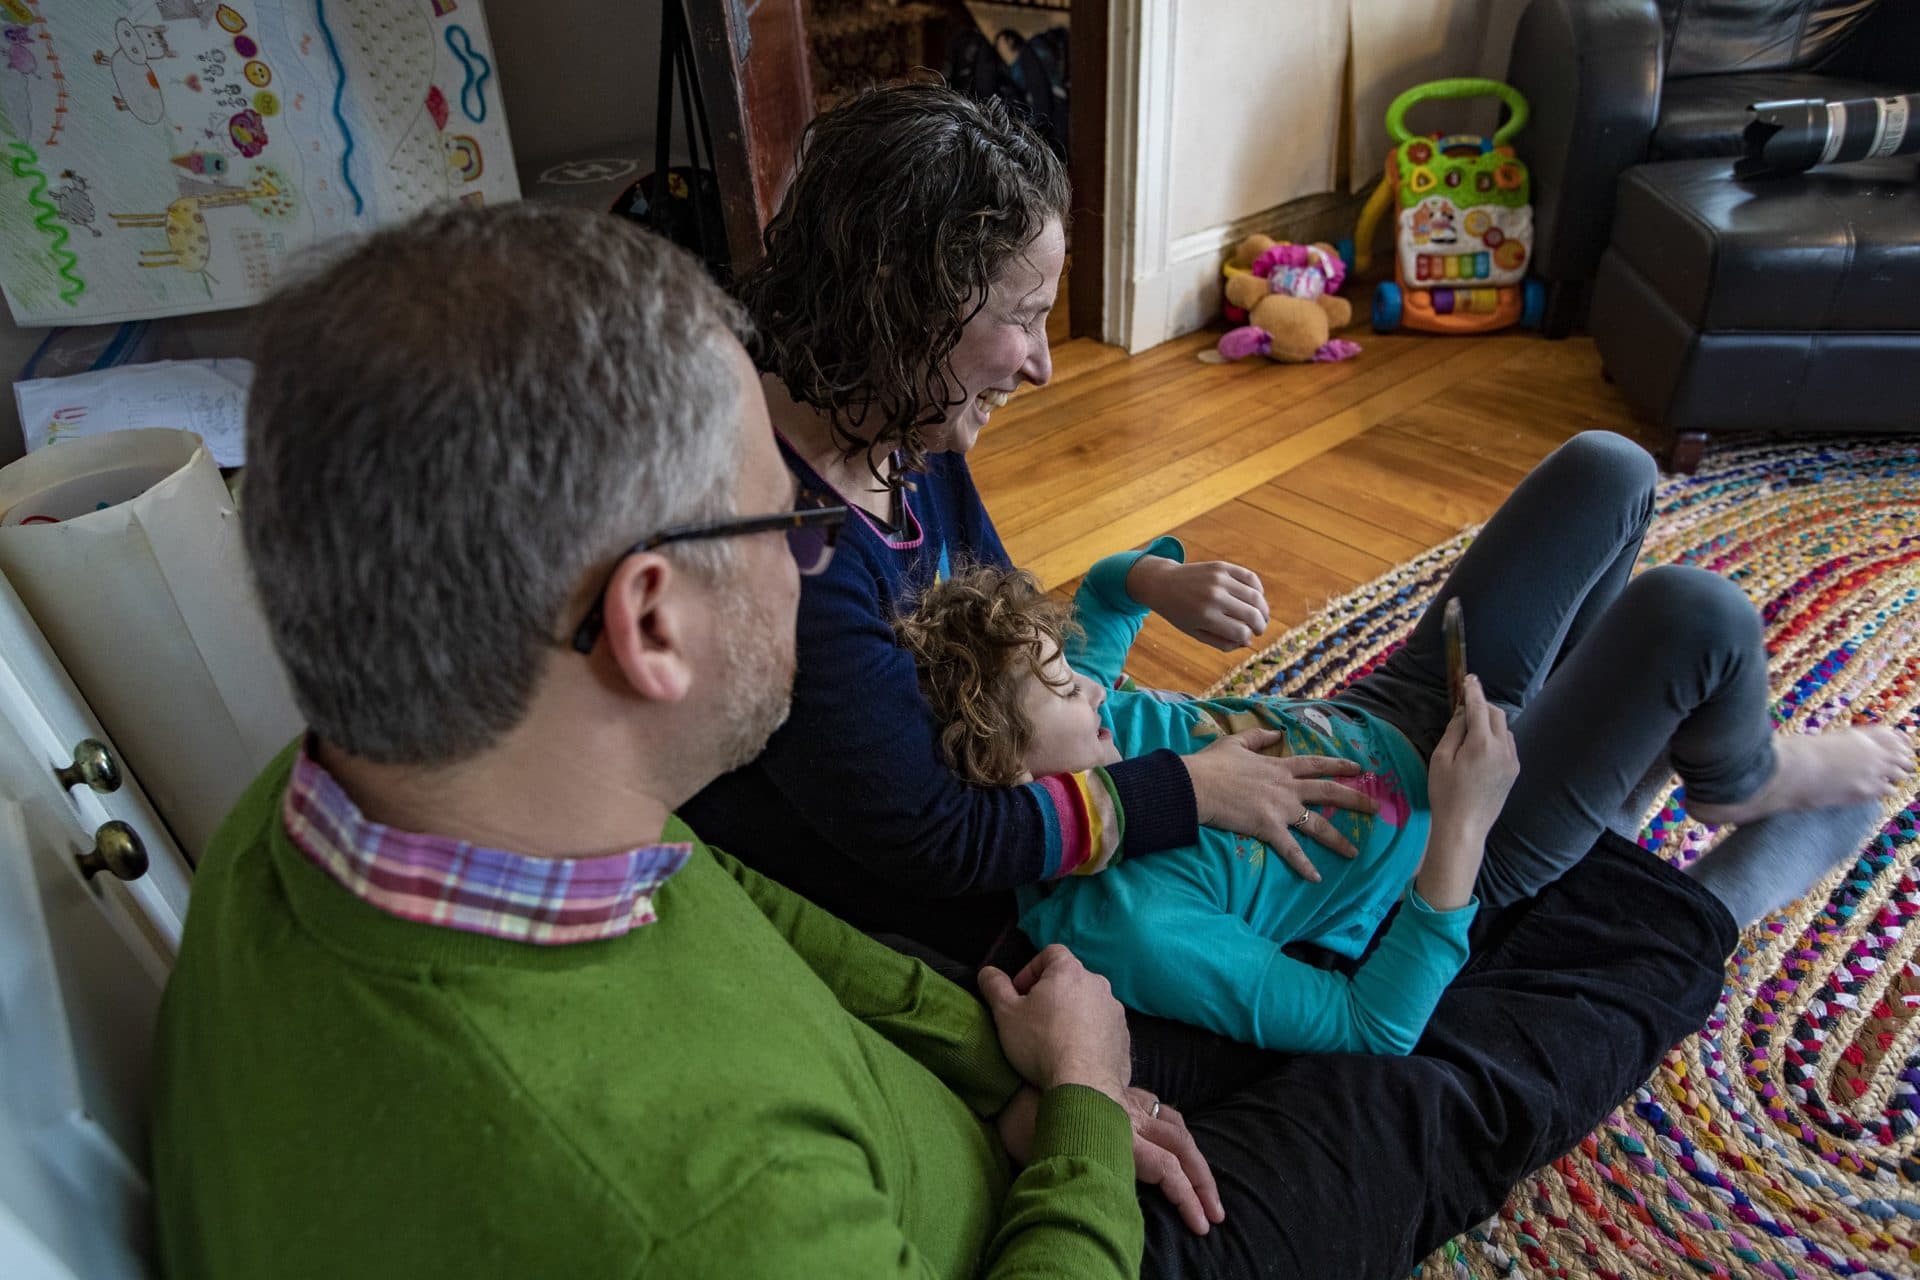 The family sits together in the living room. (Jesse Costa/WBUR)